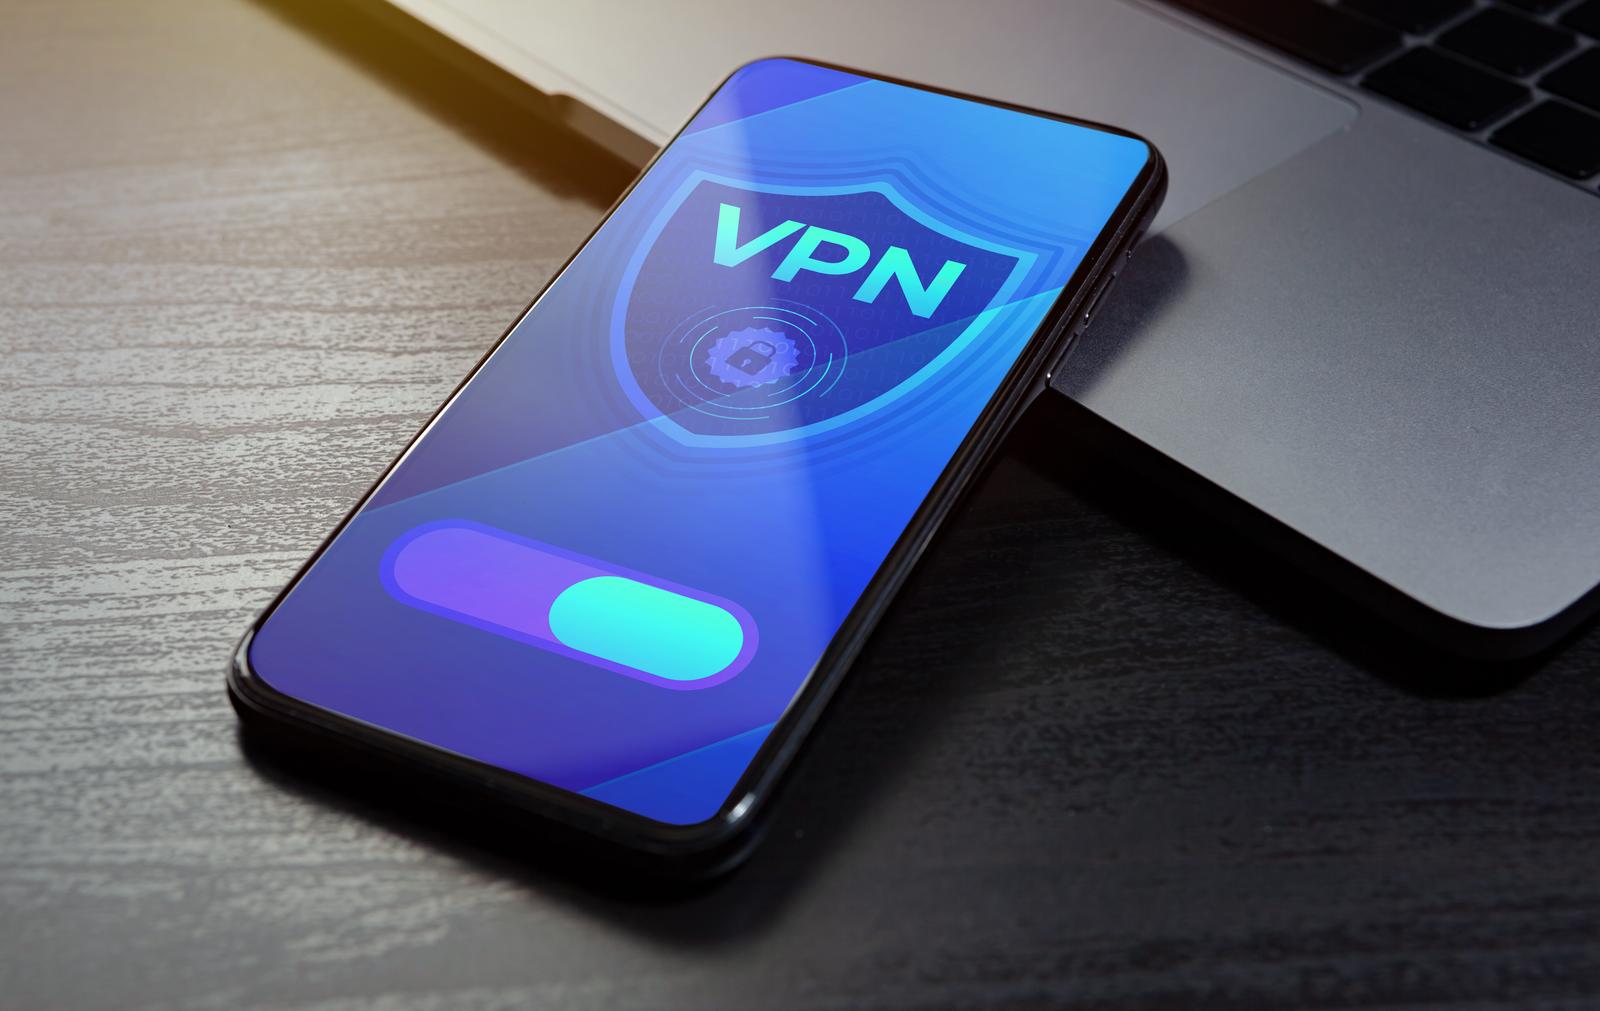 VPN Security Network - Internet Privacy Data Encryption Software Service concept. Virtual private network application for anonymous internet using, unblock websites, encrypt connection